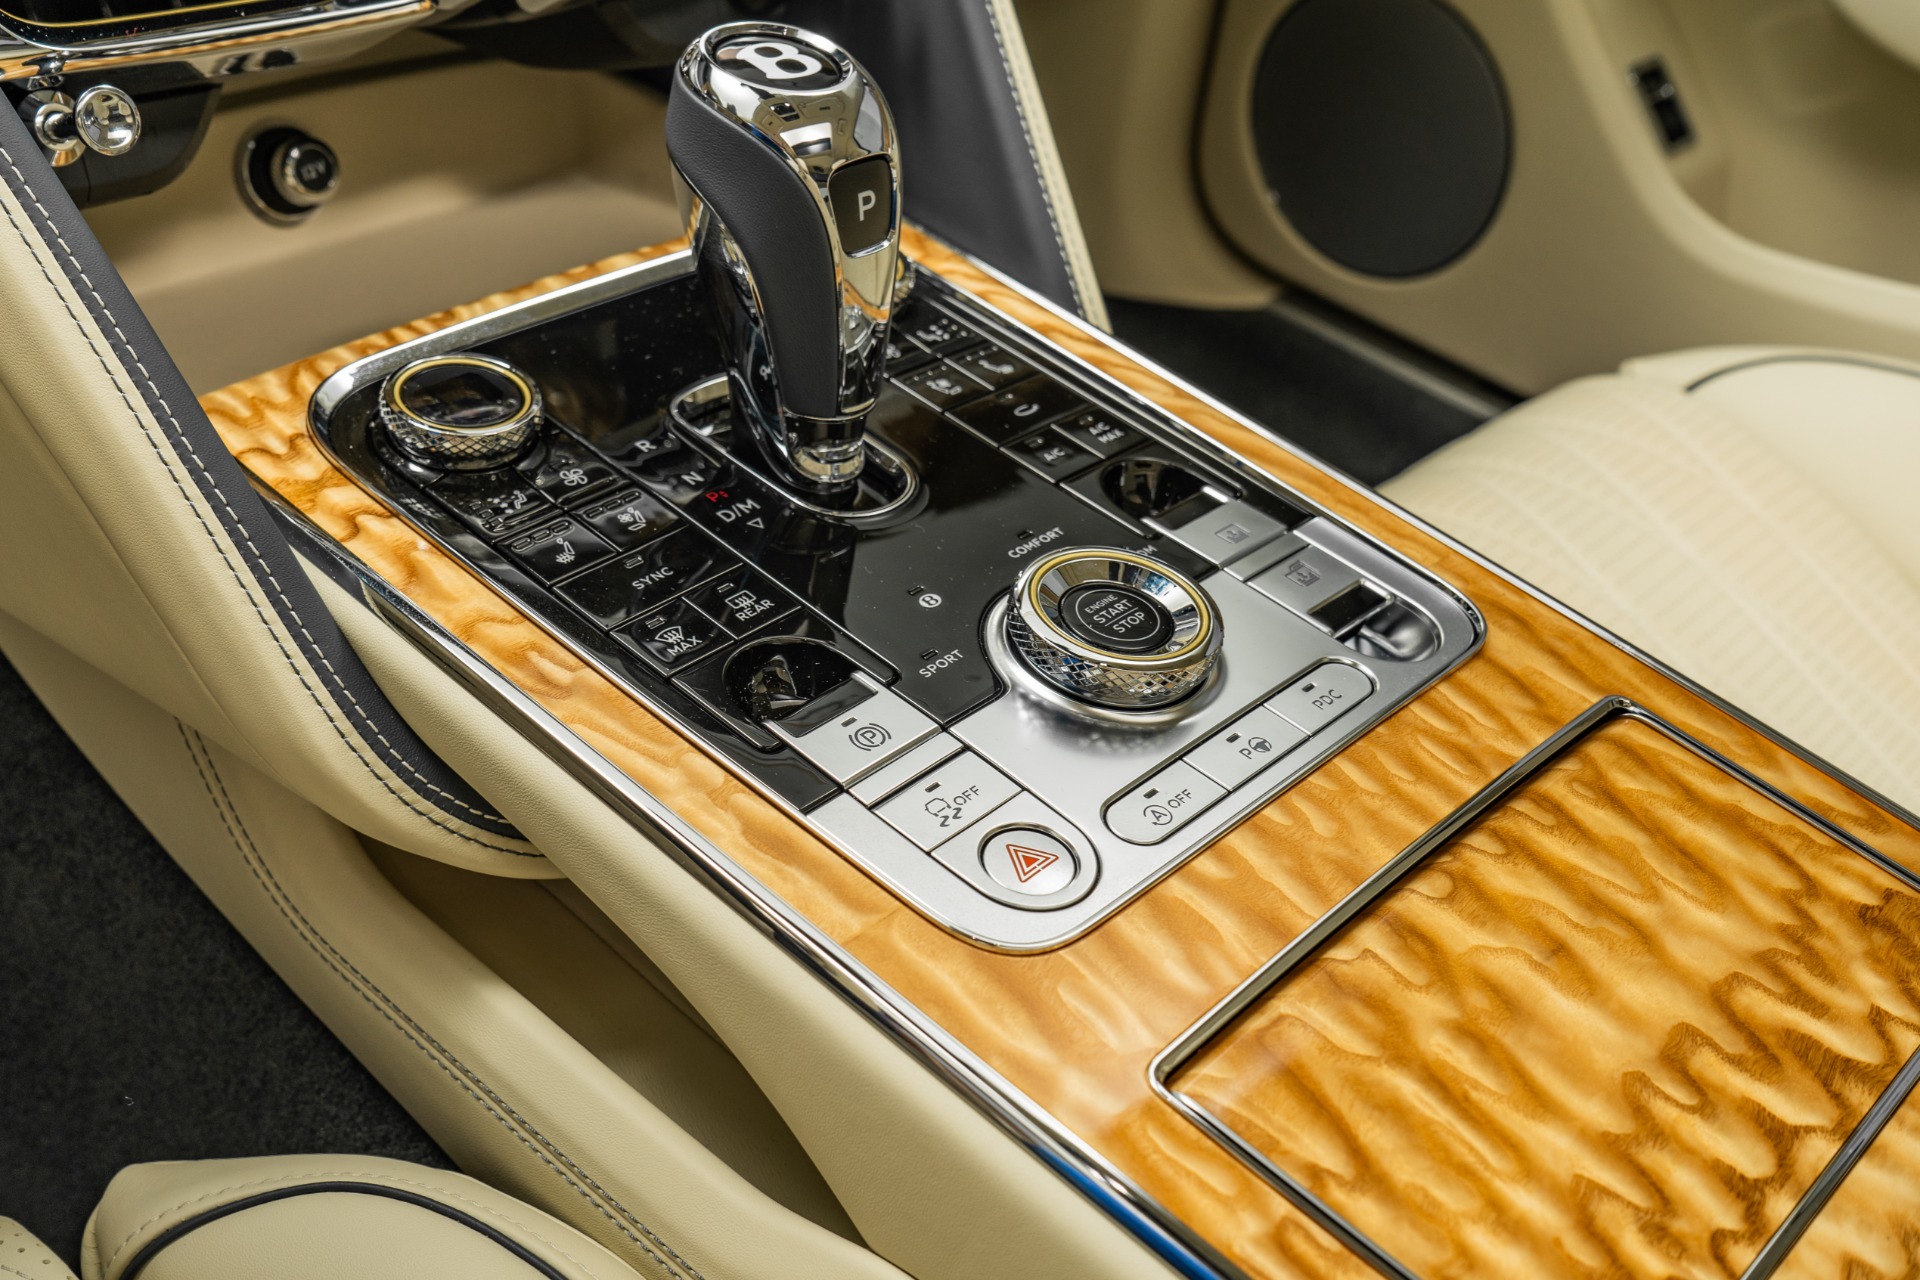 2021 BENTLEY FLYING SPUR W12 - 3,680 MILES for sale by auction in